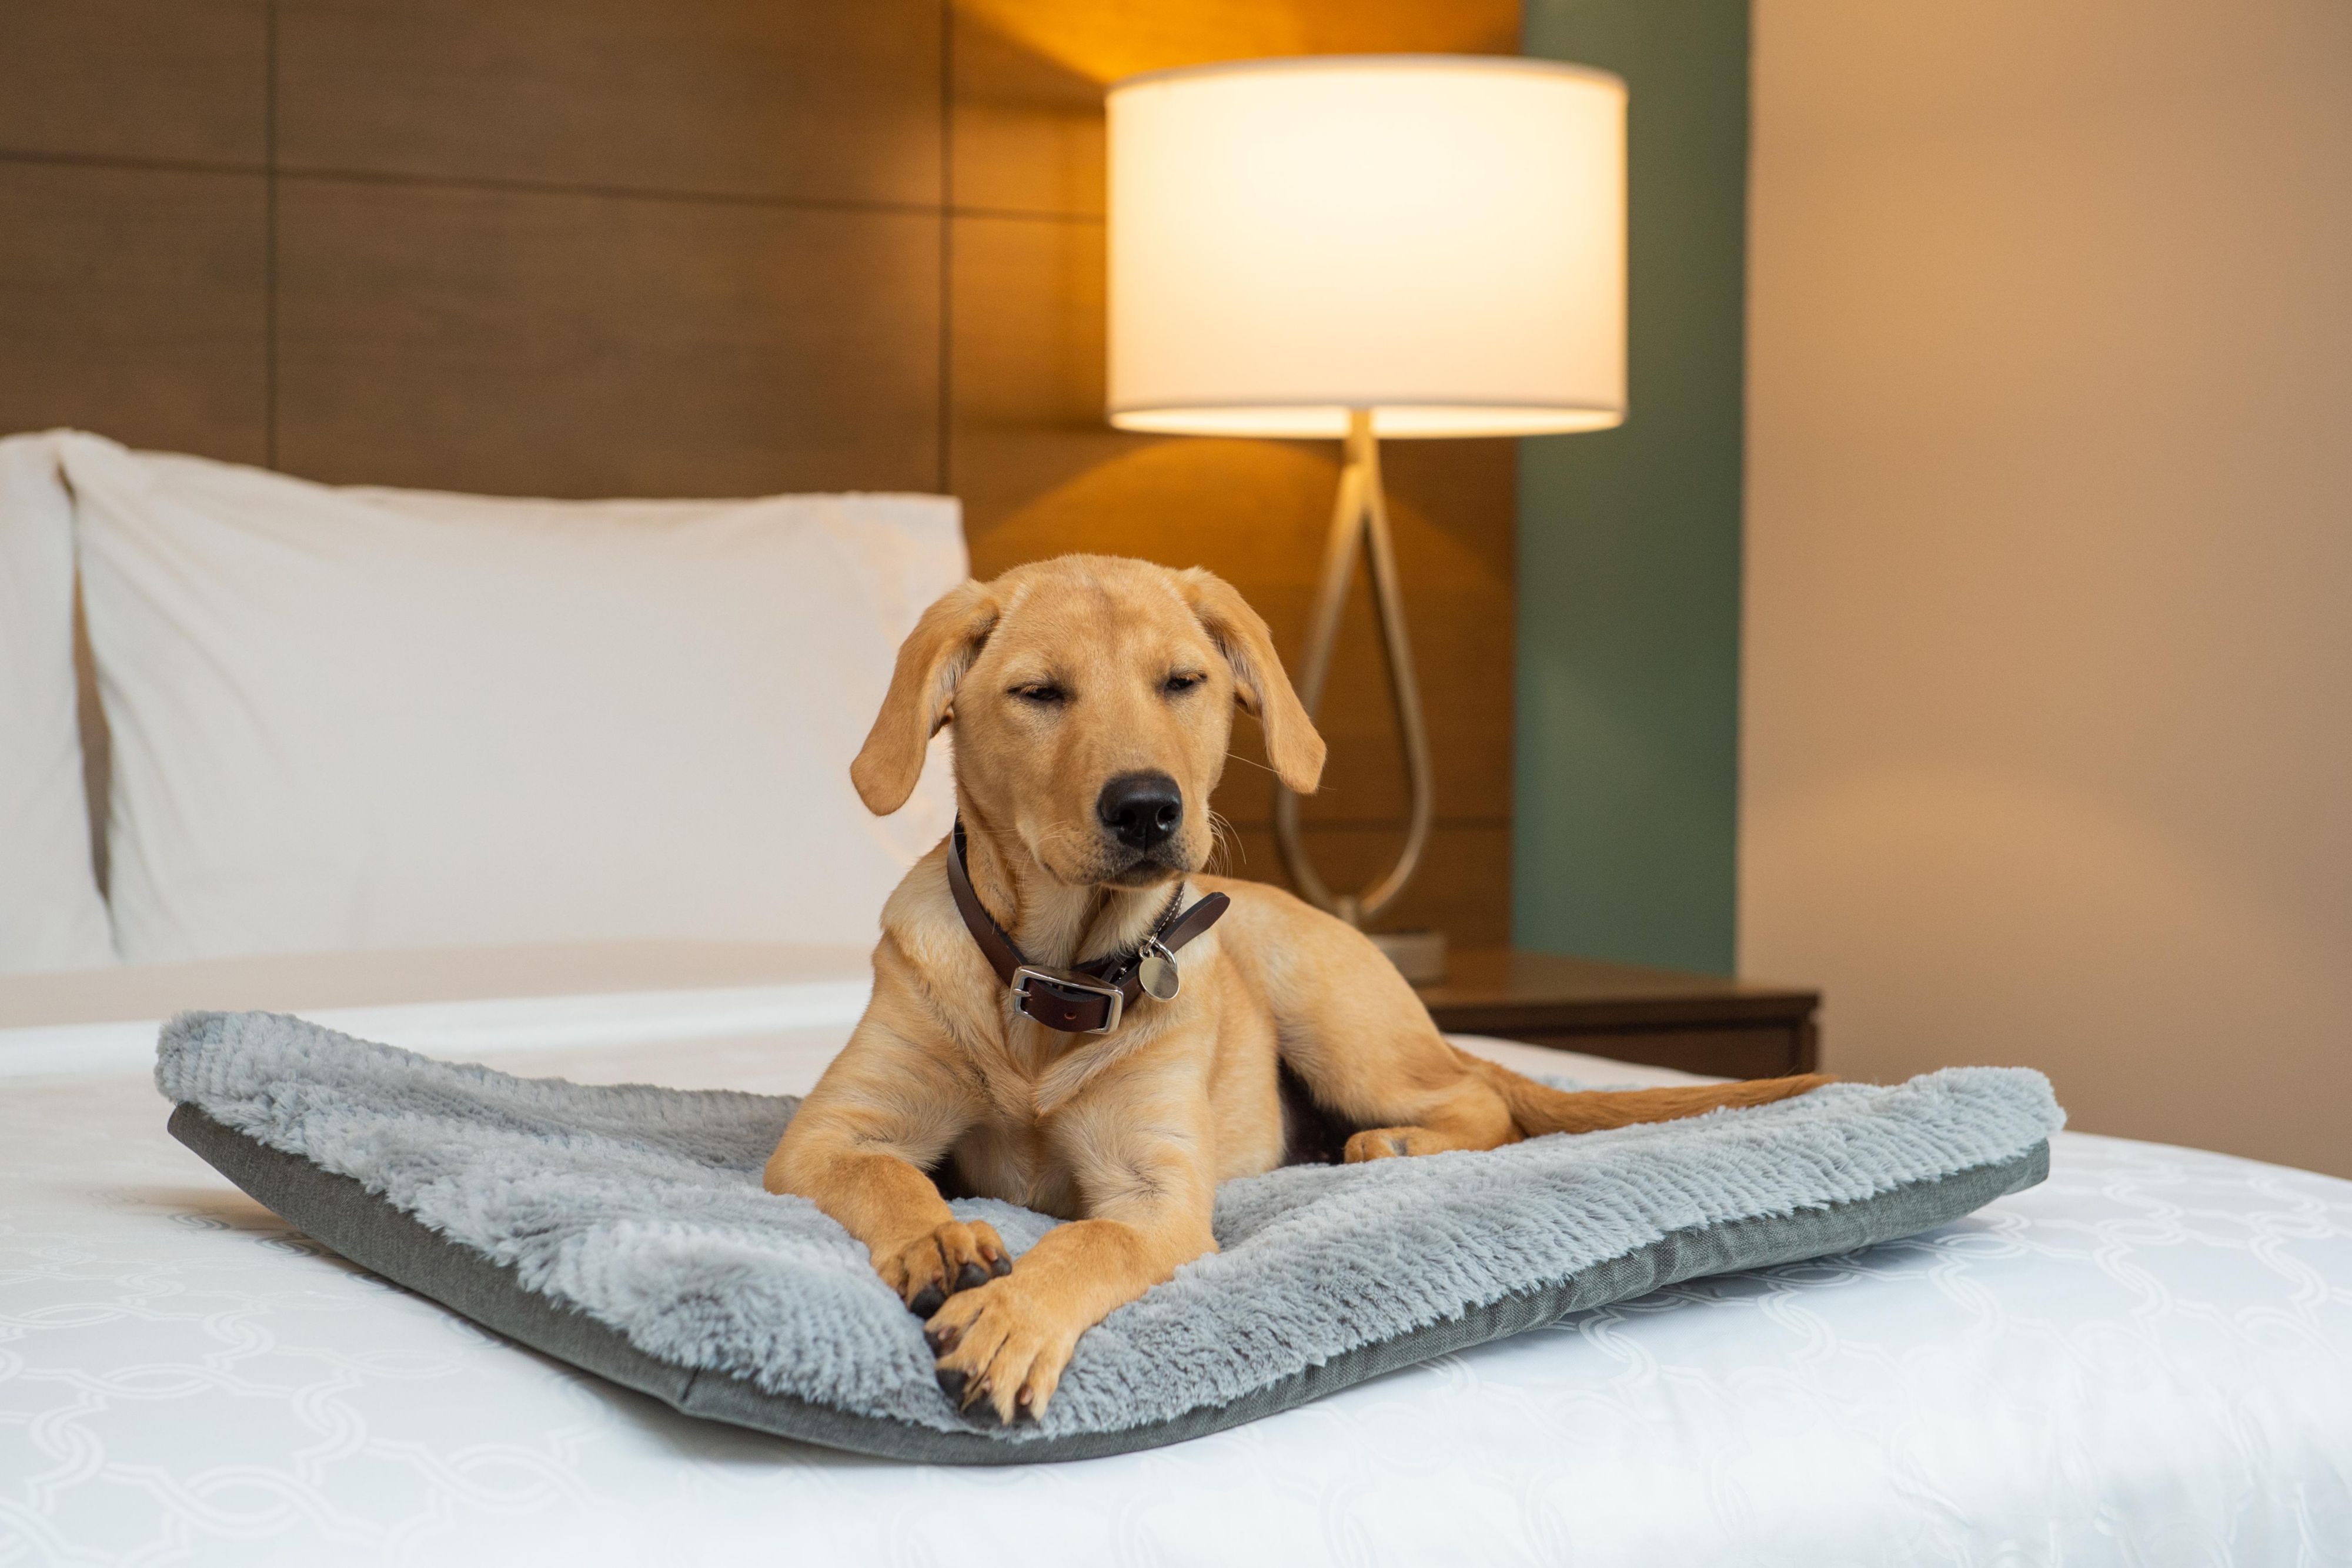 The Staybridge Suites HIllsboro North welcomes your pets! 

A nonrefundable fee of 50 USD for a 1 to 6 night stay and 150 USD for a 7 plus night stay. A pet agreement must be signed. Limit 2 dogs per room and are required to be less than 80 lbs.